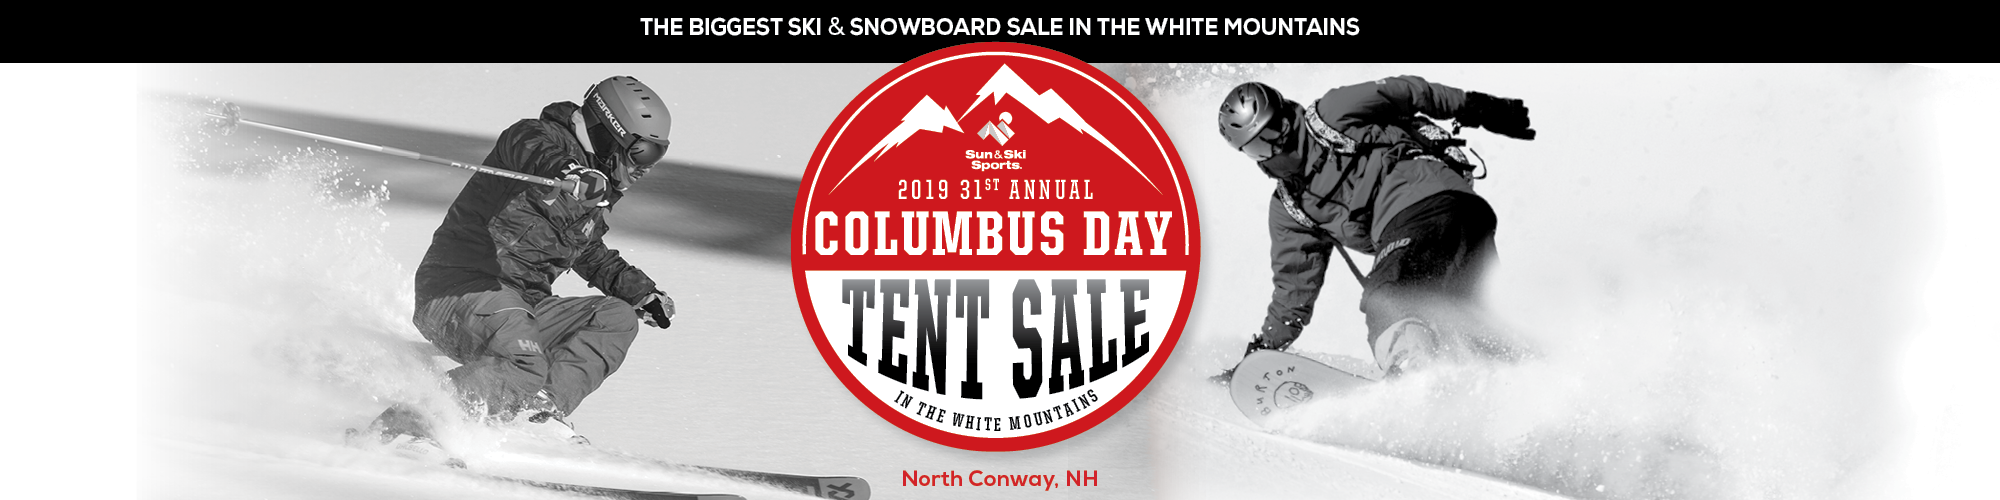 Columbus Day Tent Sale. The biggest ski & snowboard sale in the white mountains. 